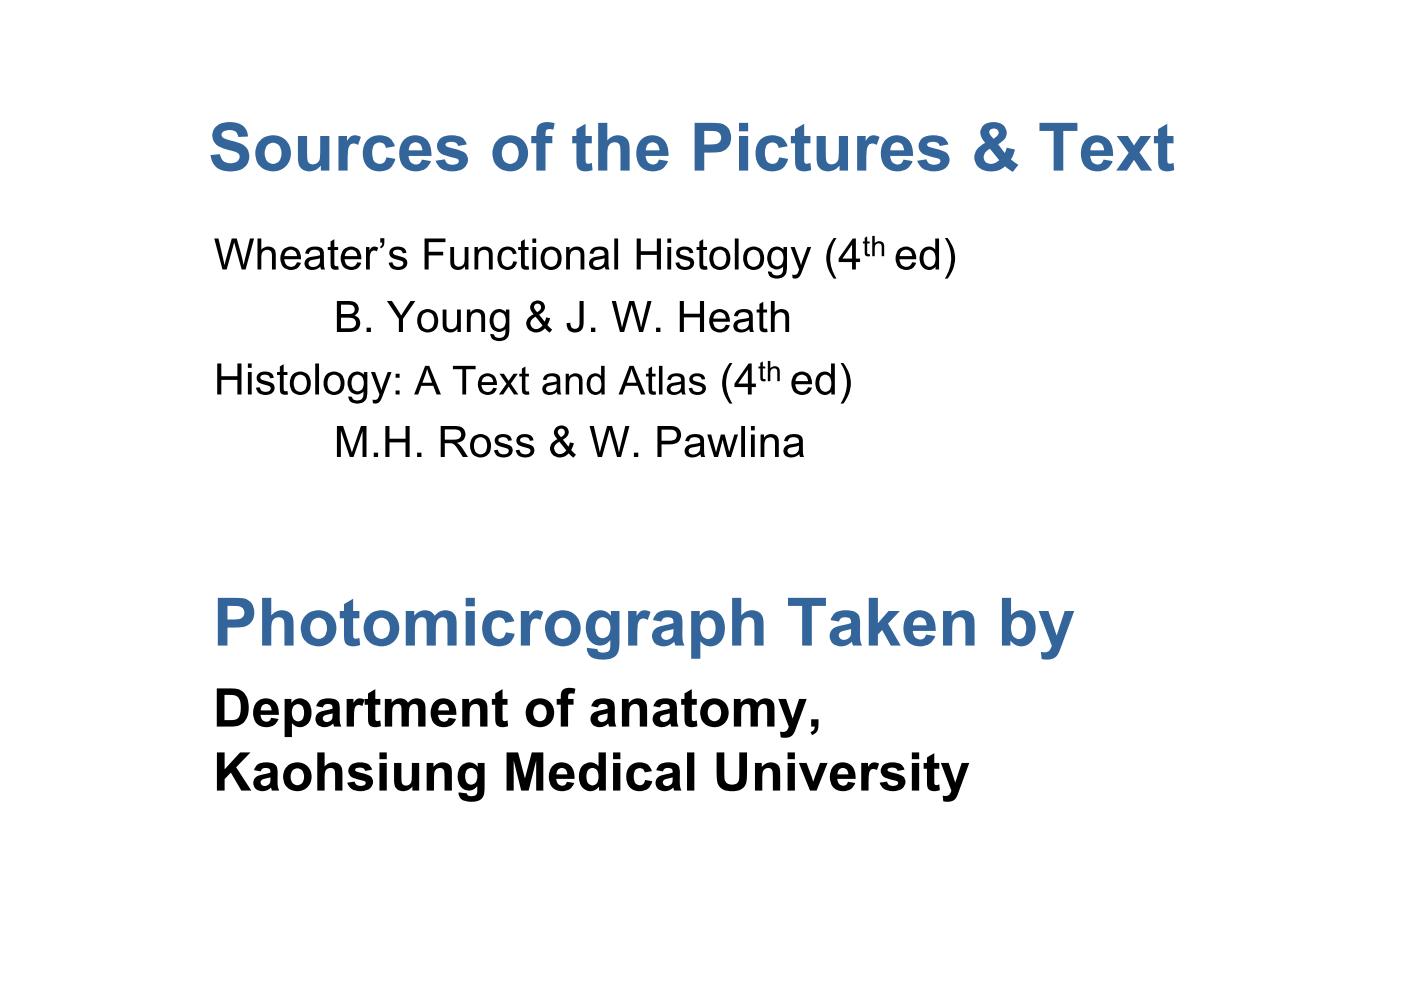 block10-2_02.jpg - Sources of the Pictures & TextWheater's Functional Histology (4th ed)      B. Young & J. W. HeathHistology: A Text and Atlas (4th ed)      M.H. Ross & W. PawlinaPhotomicrograph Taken byDepartment of anatomy,Kaohsiung Medical University